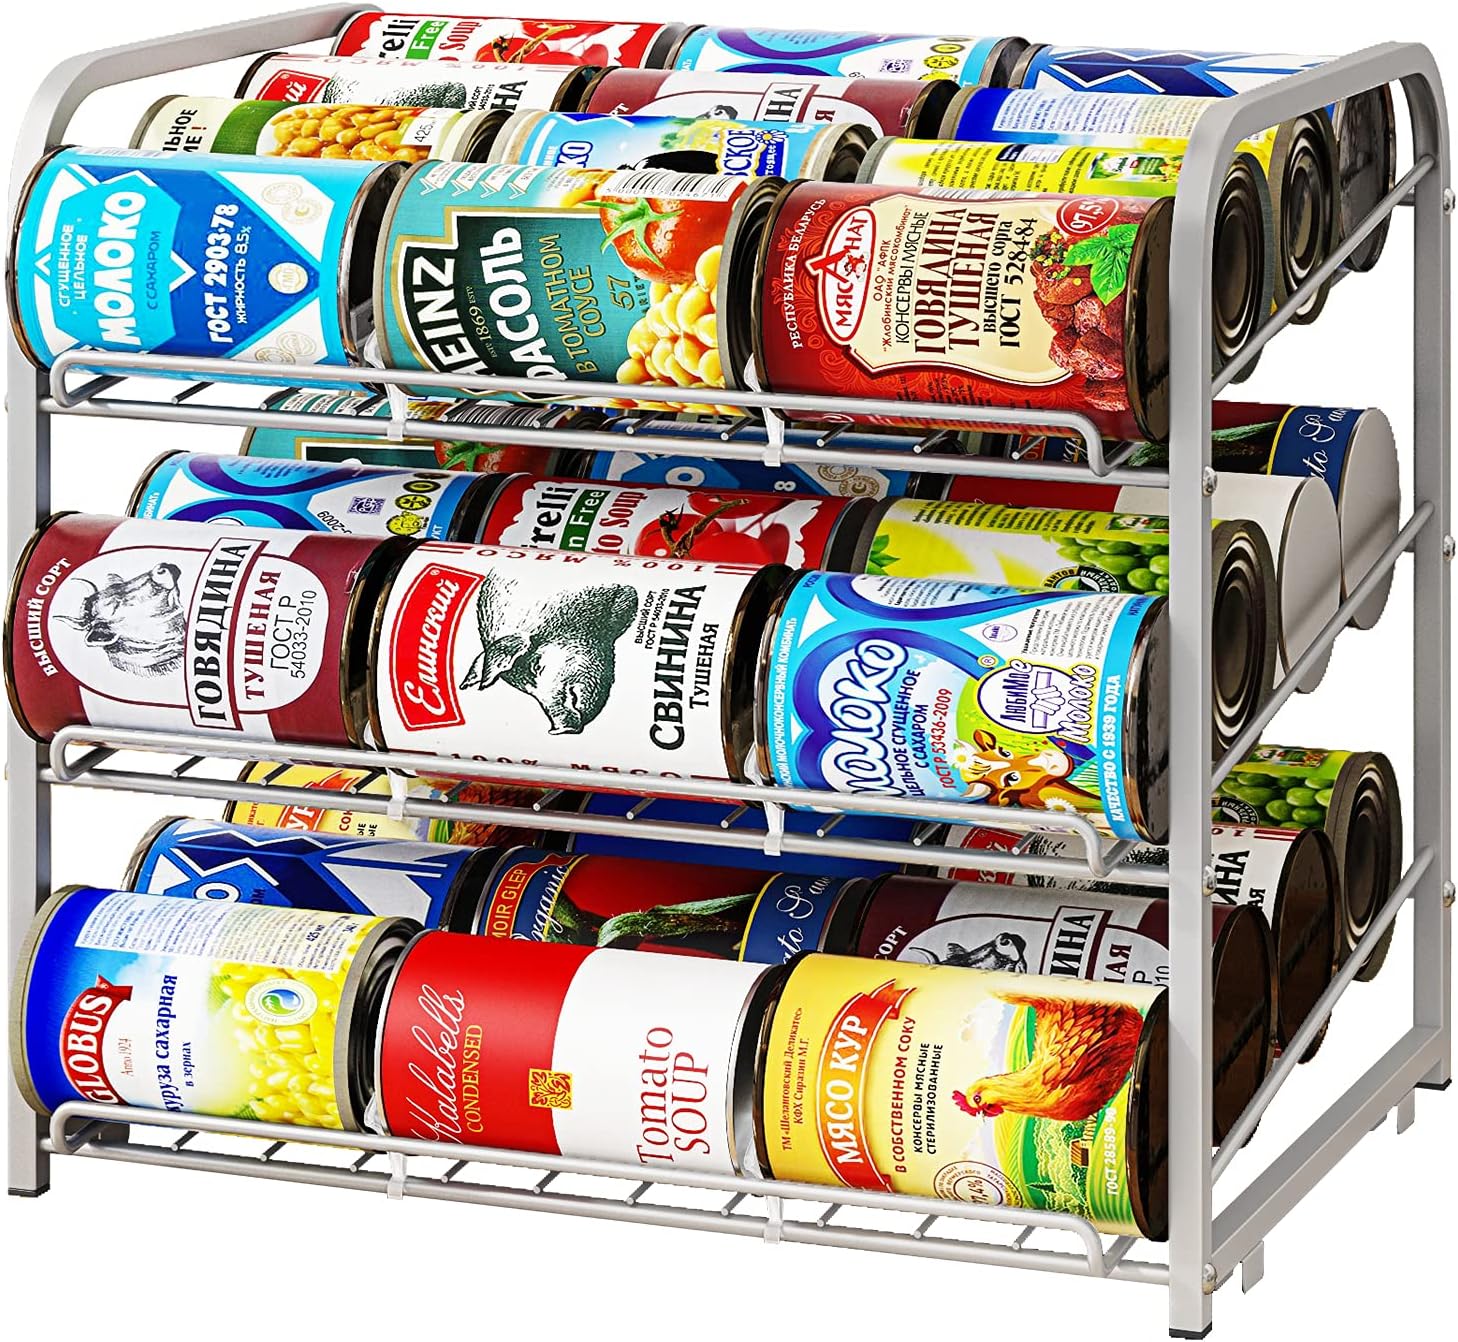 AIYAKA Can Rack Organizer, 3 Tier Stackable Can Storage Dispenser, for Food Storage, Kitchen Cabinets or Pantry, Storage for 36 Cans, Silver